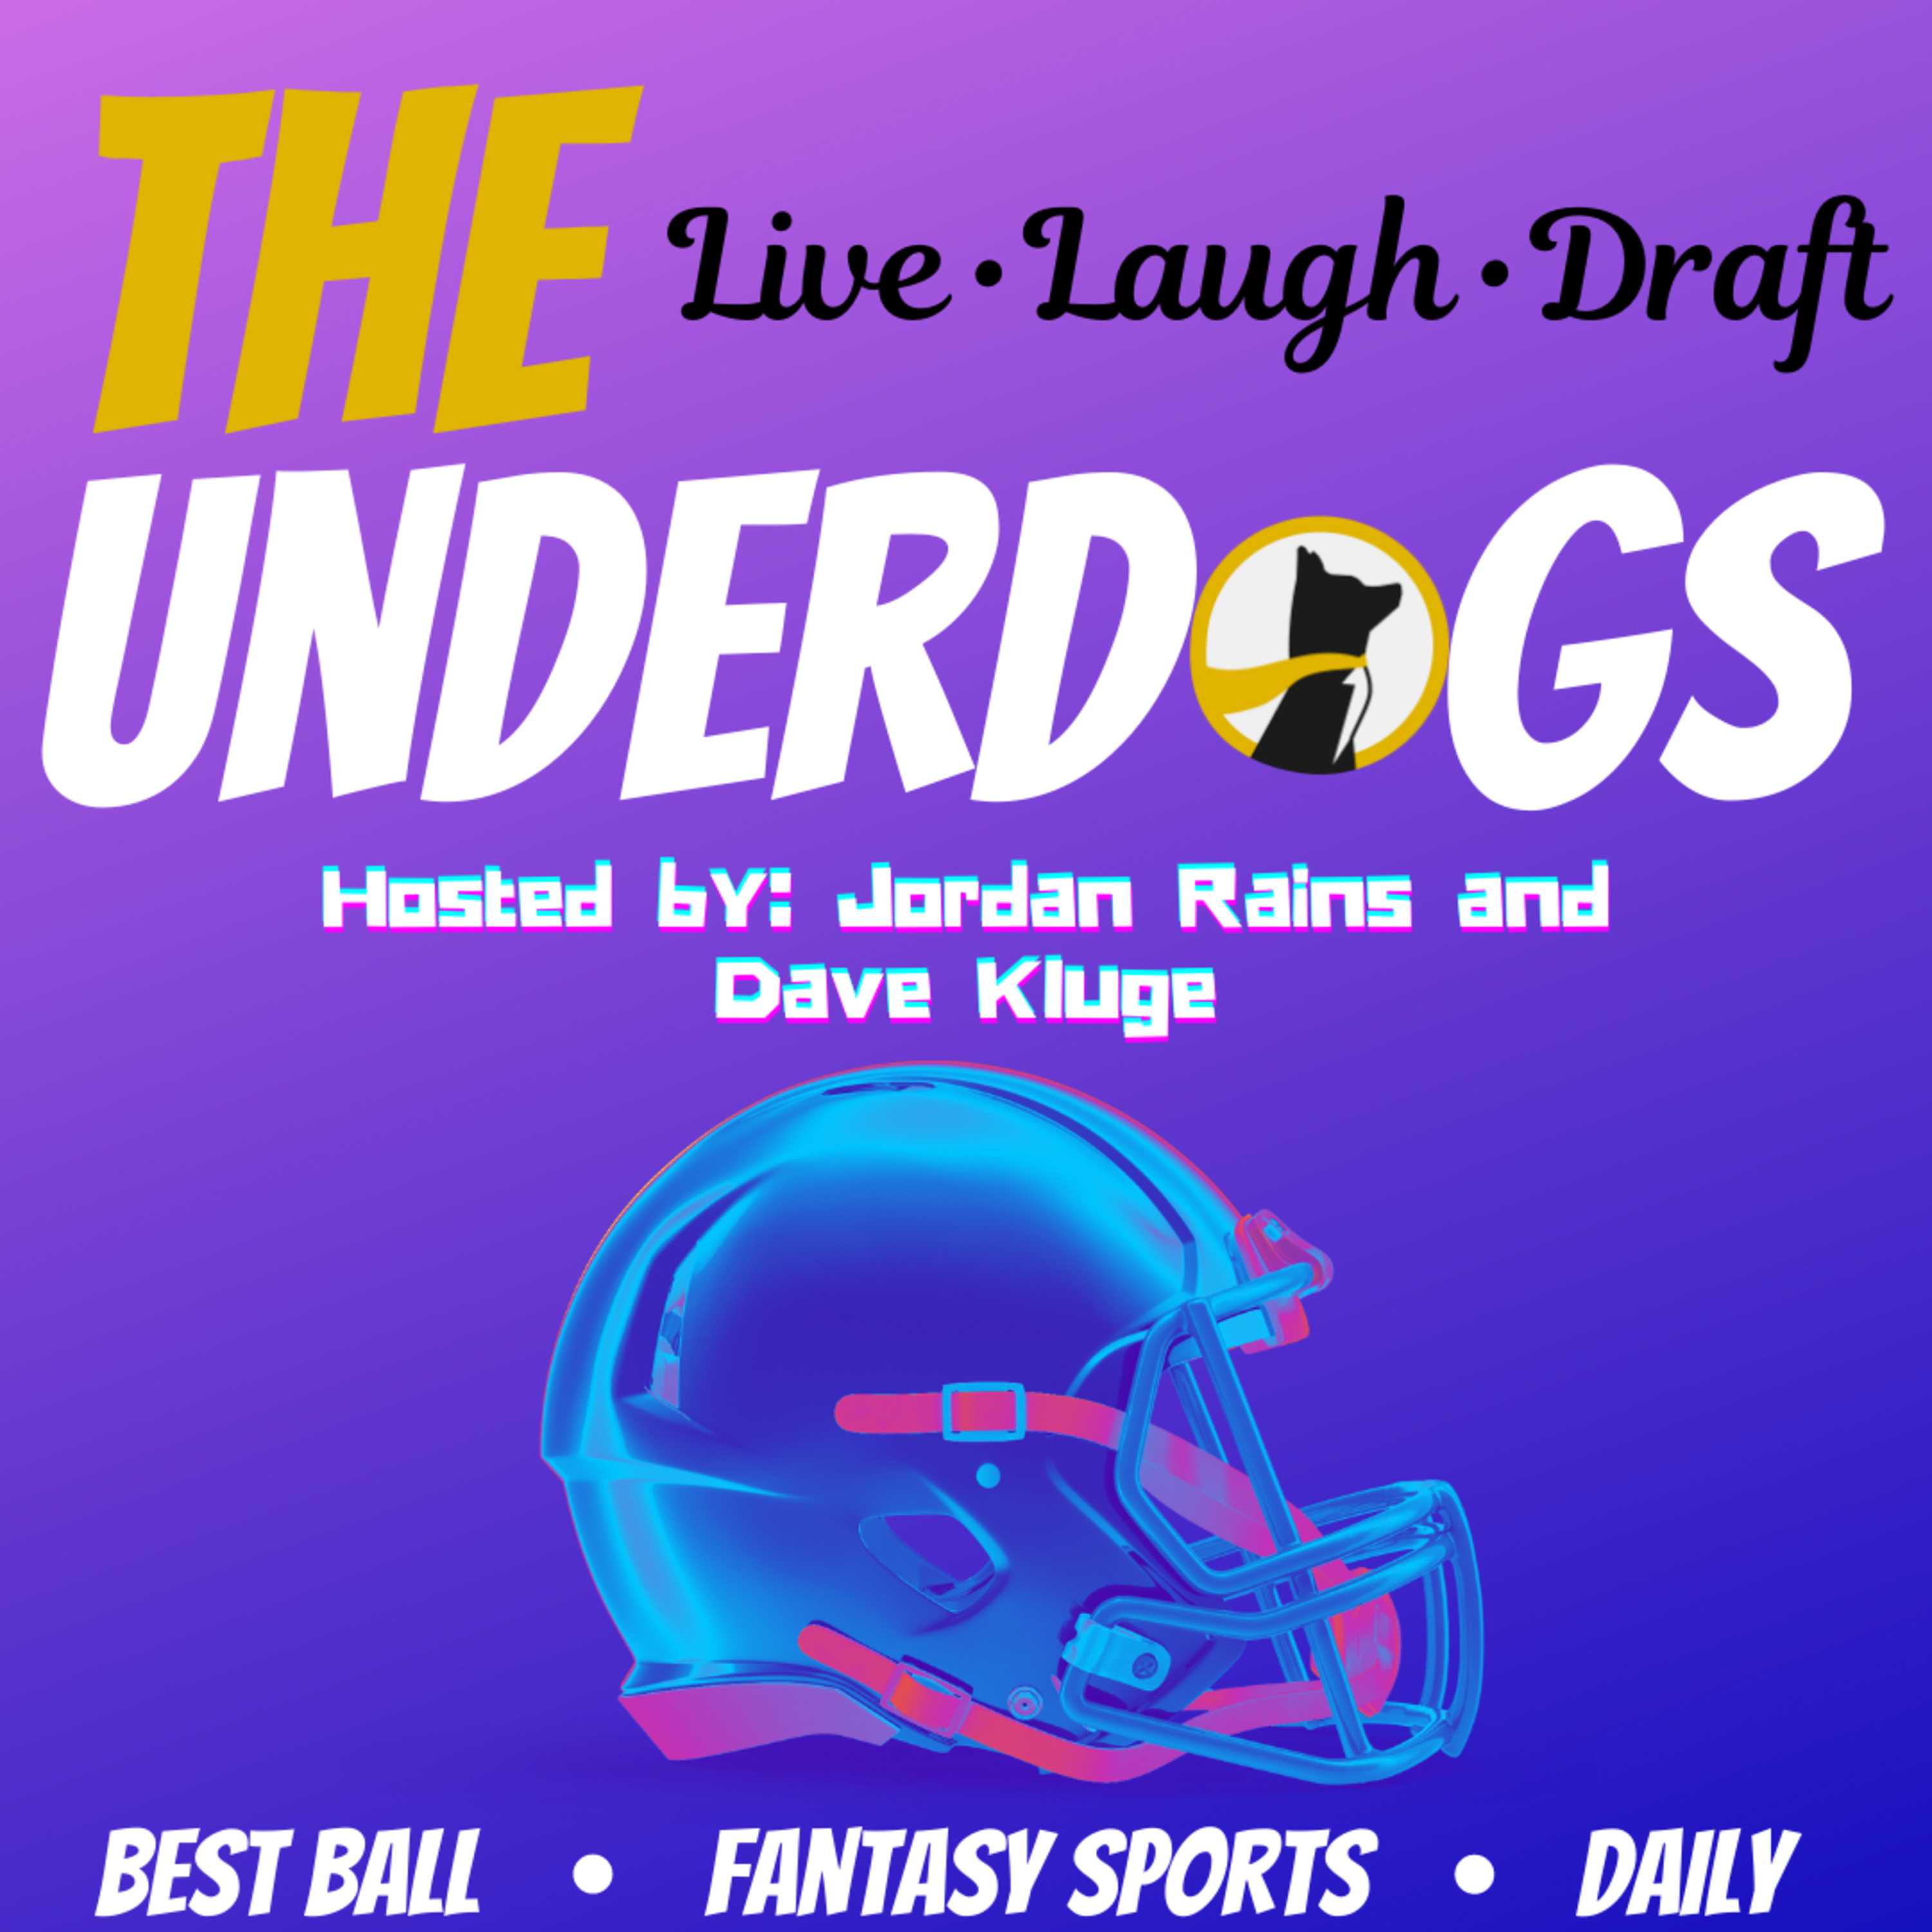 CROSSOVER EVENT! Week 6 Underdog Head 2 Head Draft! | The Underdogs ( New Podcast Feed in the Description)